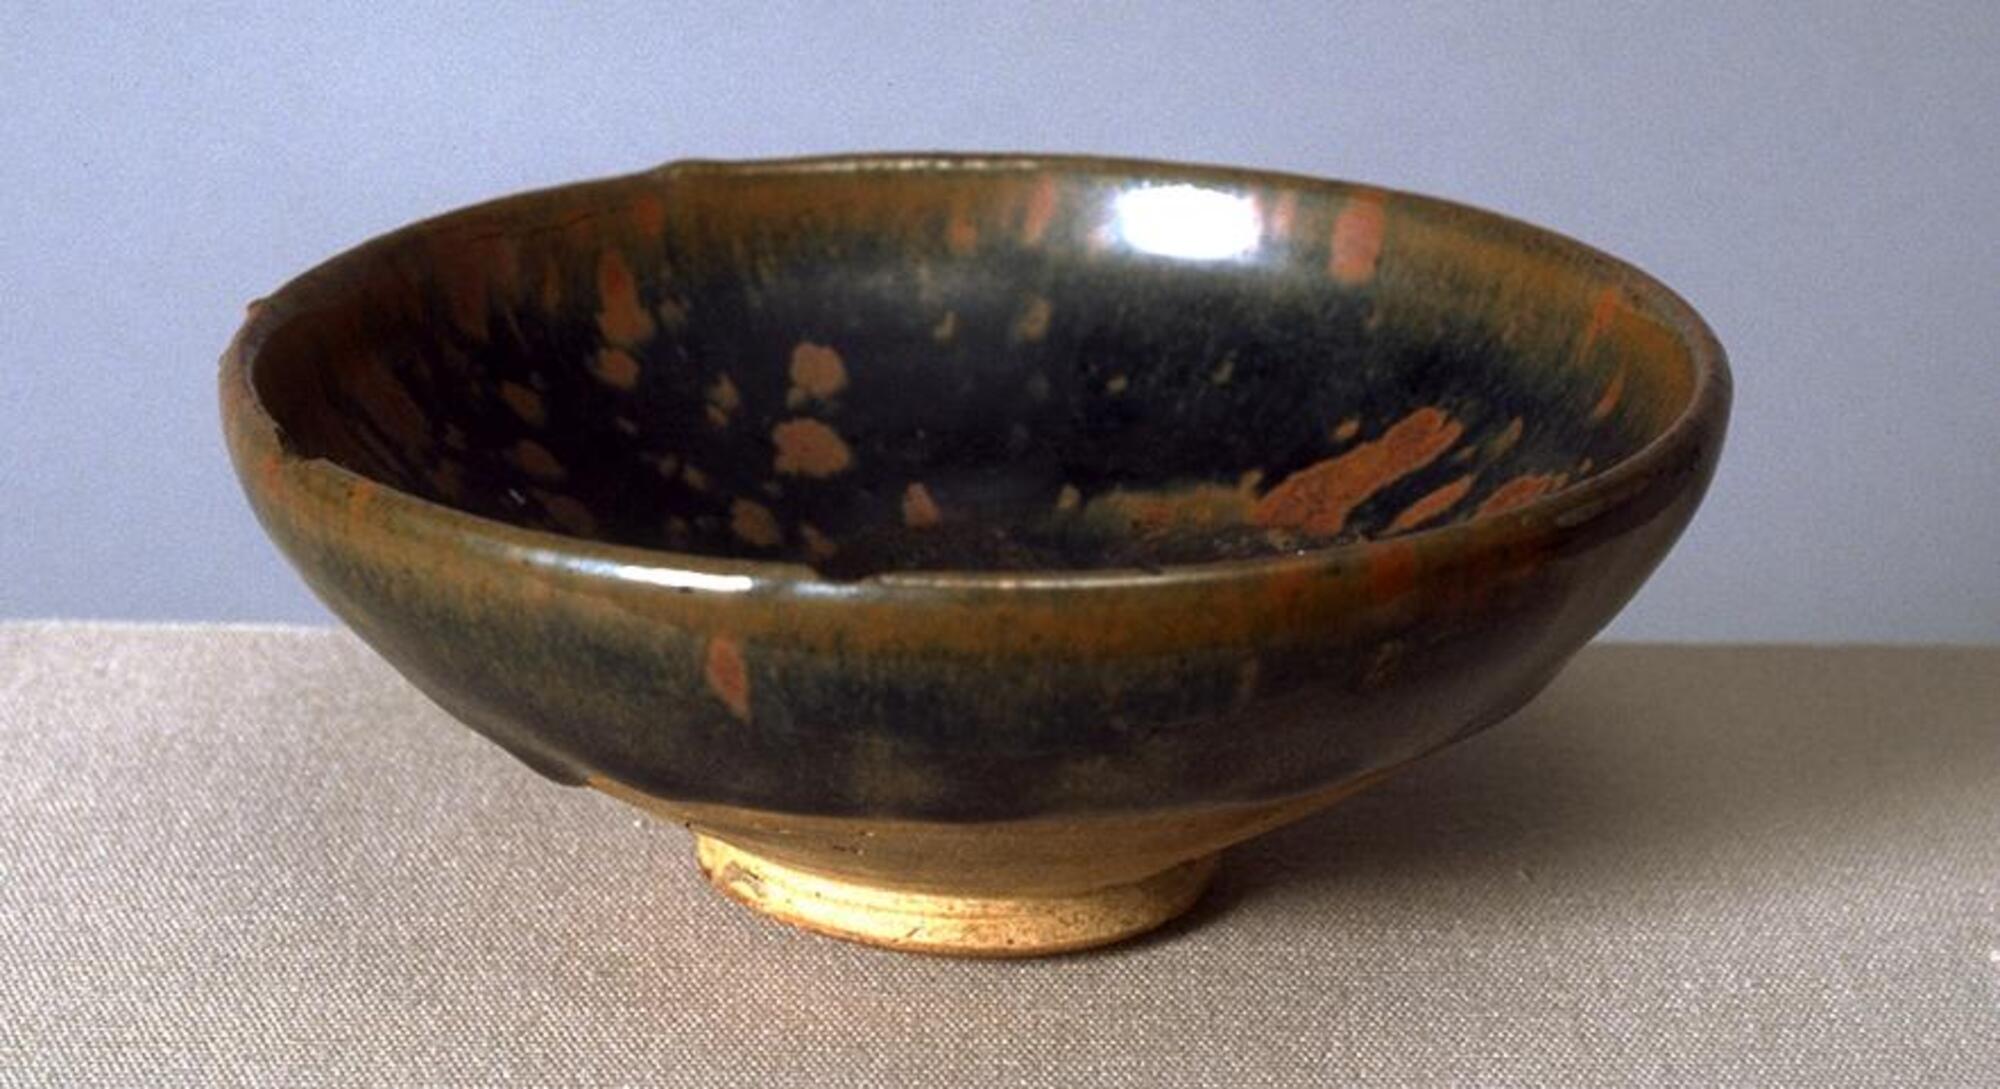 A wide, shallow, bowl on a straight foot ring, covered in a thickly applied, dark, iron-rich black glaze with lighter russet-brown patridge feather markings (鷓鴣斑 <em>zhegu ban</em>) .  The thick glaze thins at the rim to a russet-brown color.